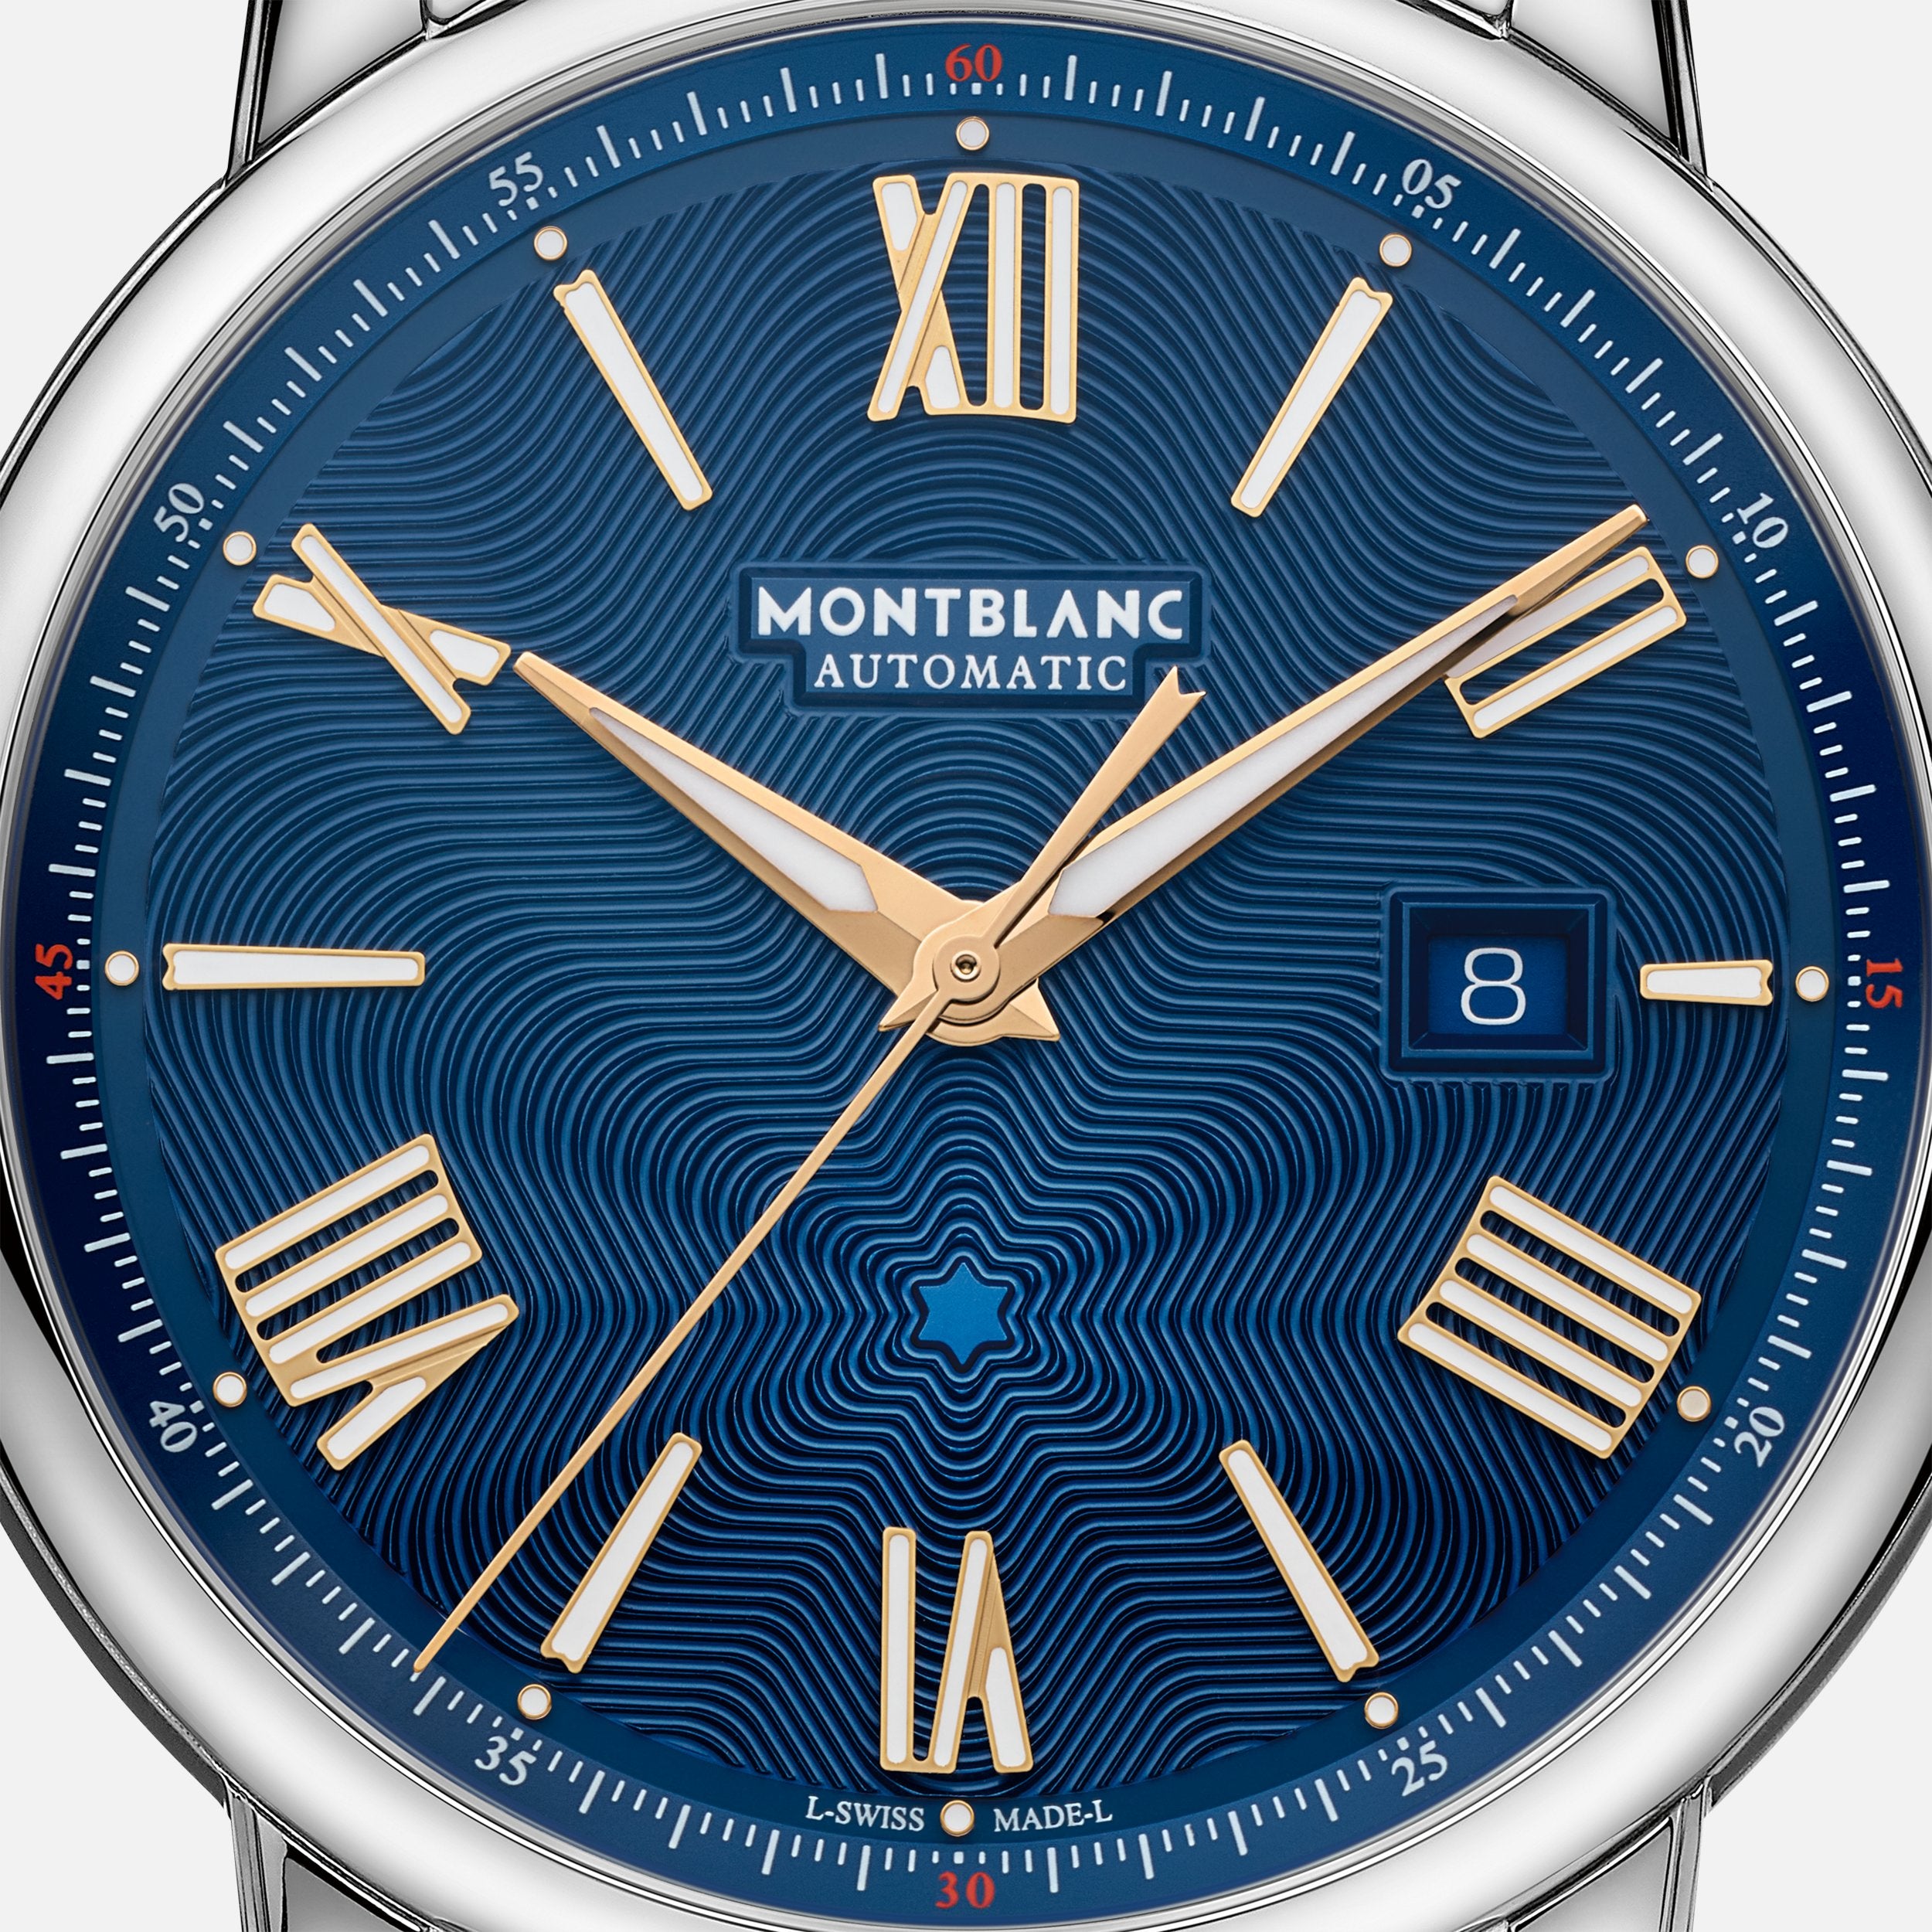 MONTBLANC STAR LEGACY AUTOMATIC DATE 43 MM LIMITED EDITION - 800 PIECES